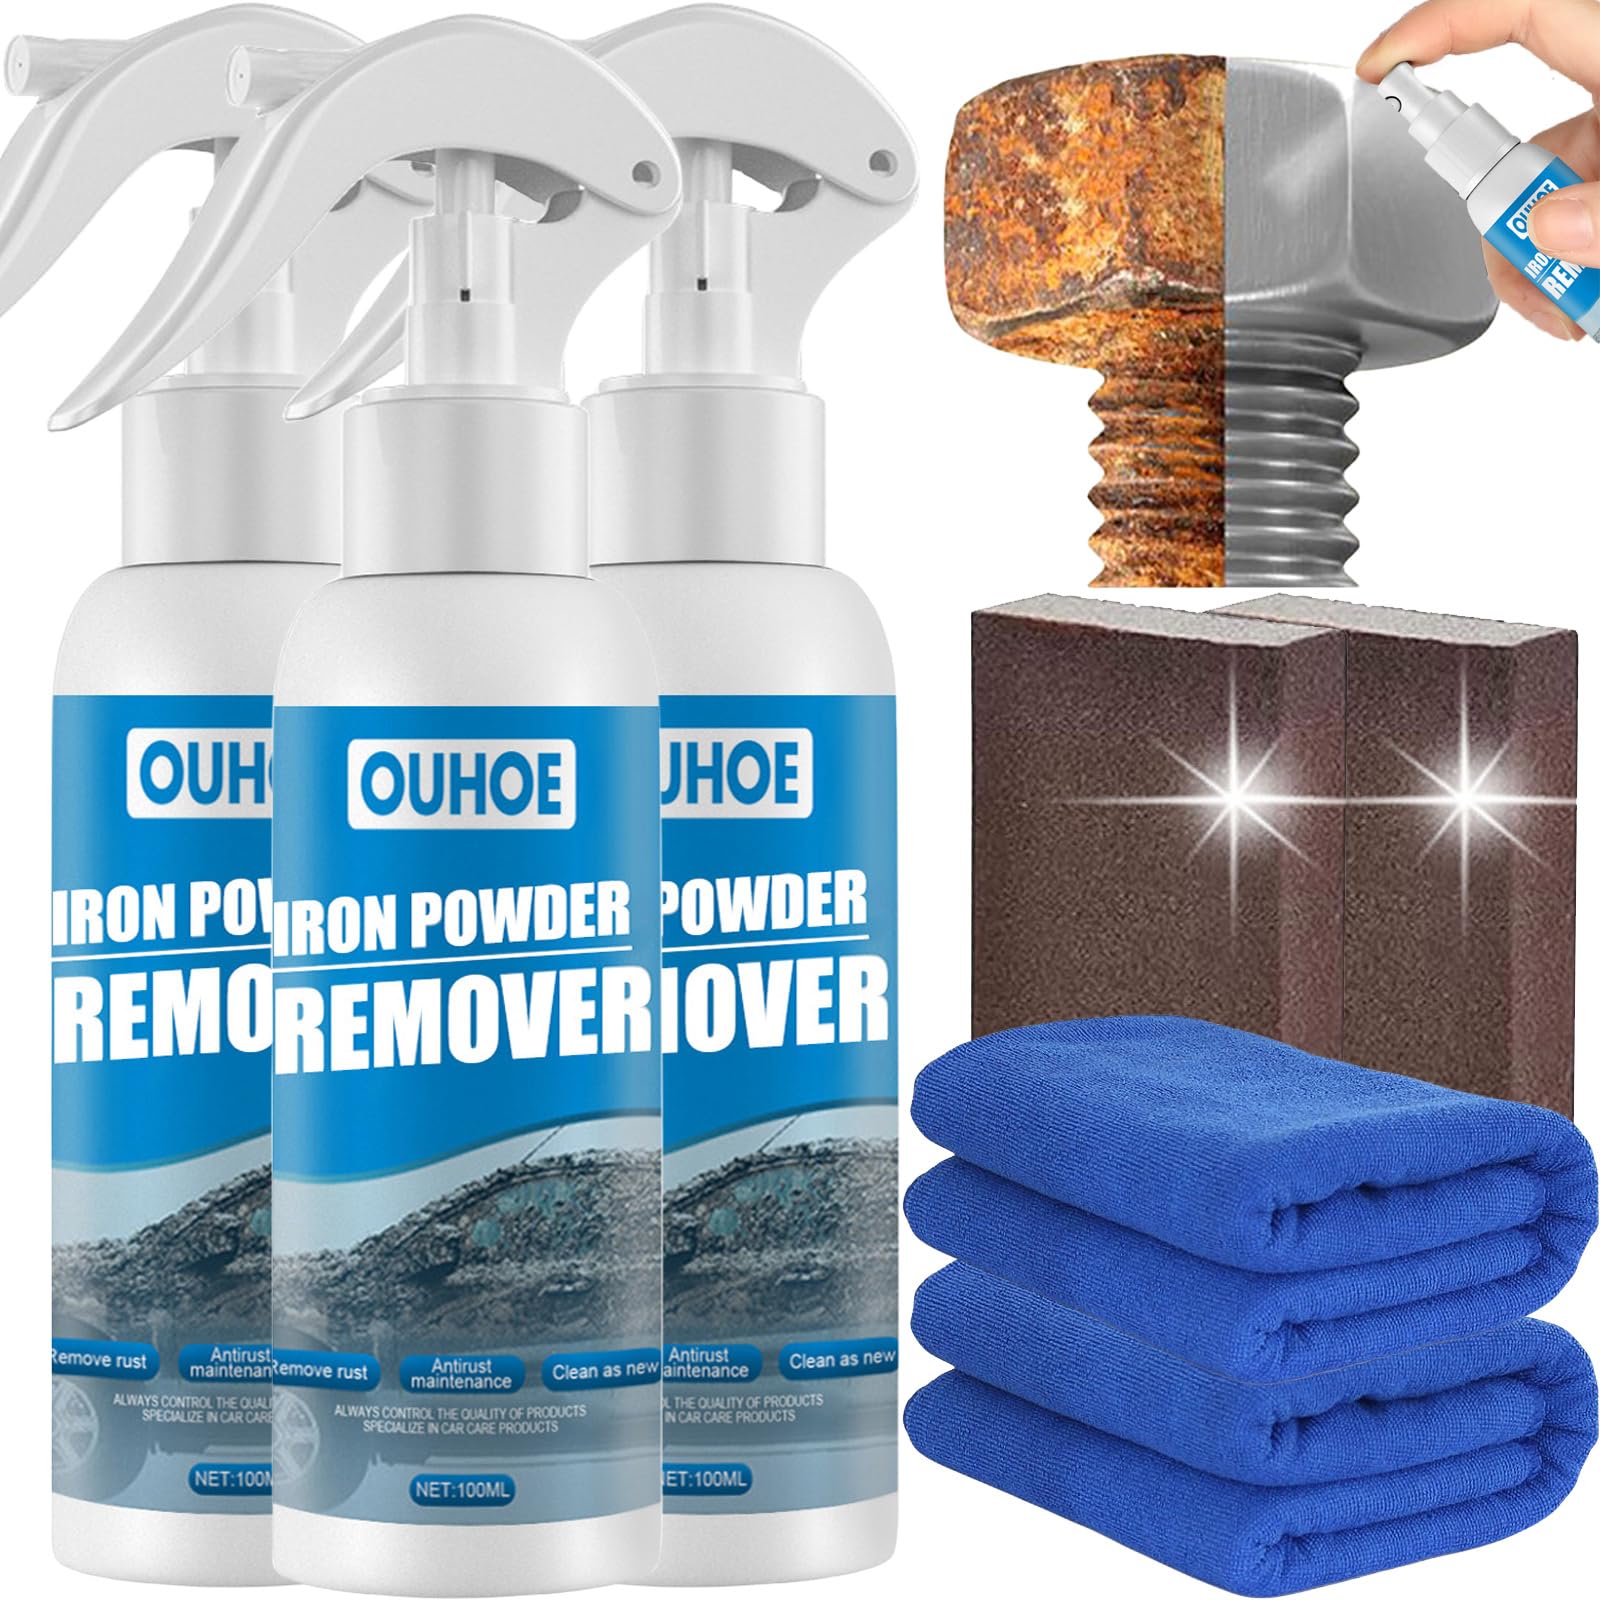 Donubiiu Ouhoe Rust Removal Spray, Ouhoe Iron Powder Remover, Rustout Instant Remover Spray, Multi Purpose Rust Remover Spray, Multifunctional Rust Removal Spray for Metal (100ML-3PCS) von Donubiiu